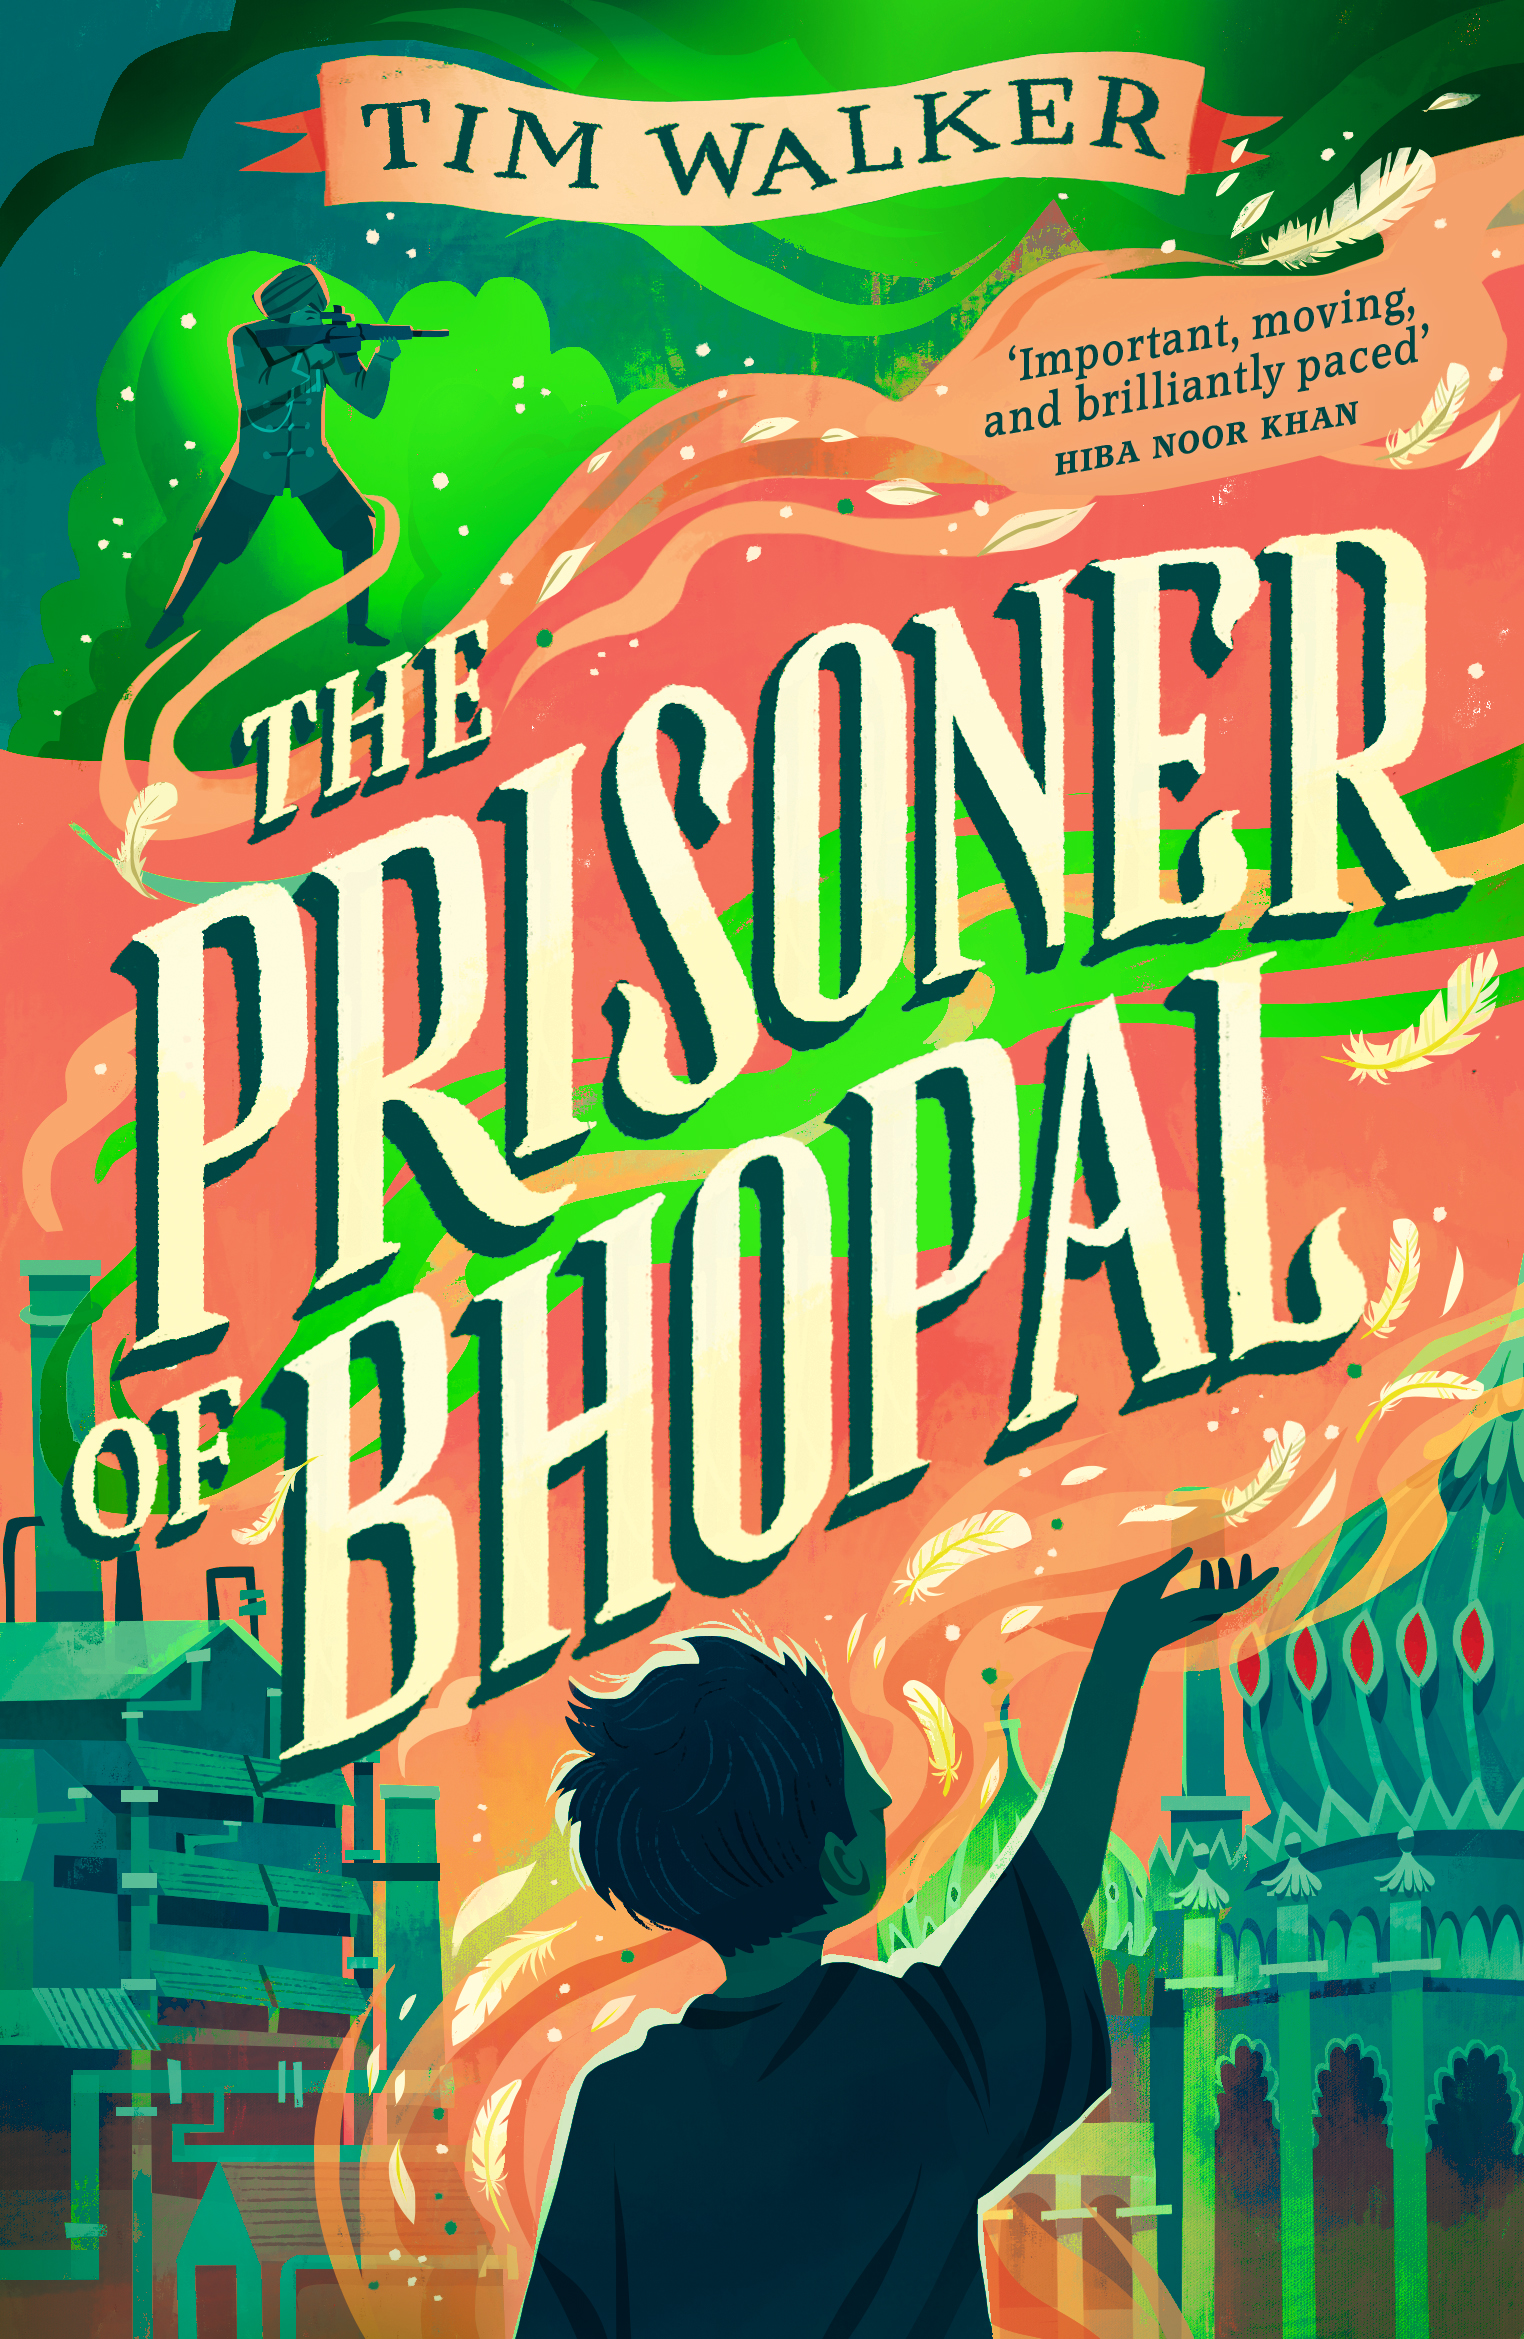 Cover illustration by Chaaya Prabhat